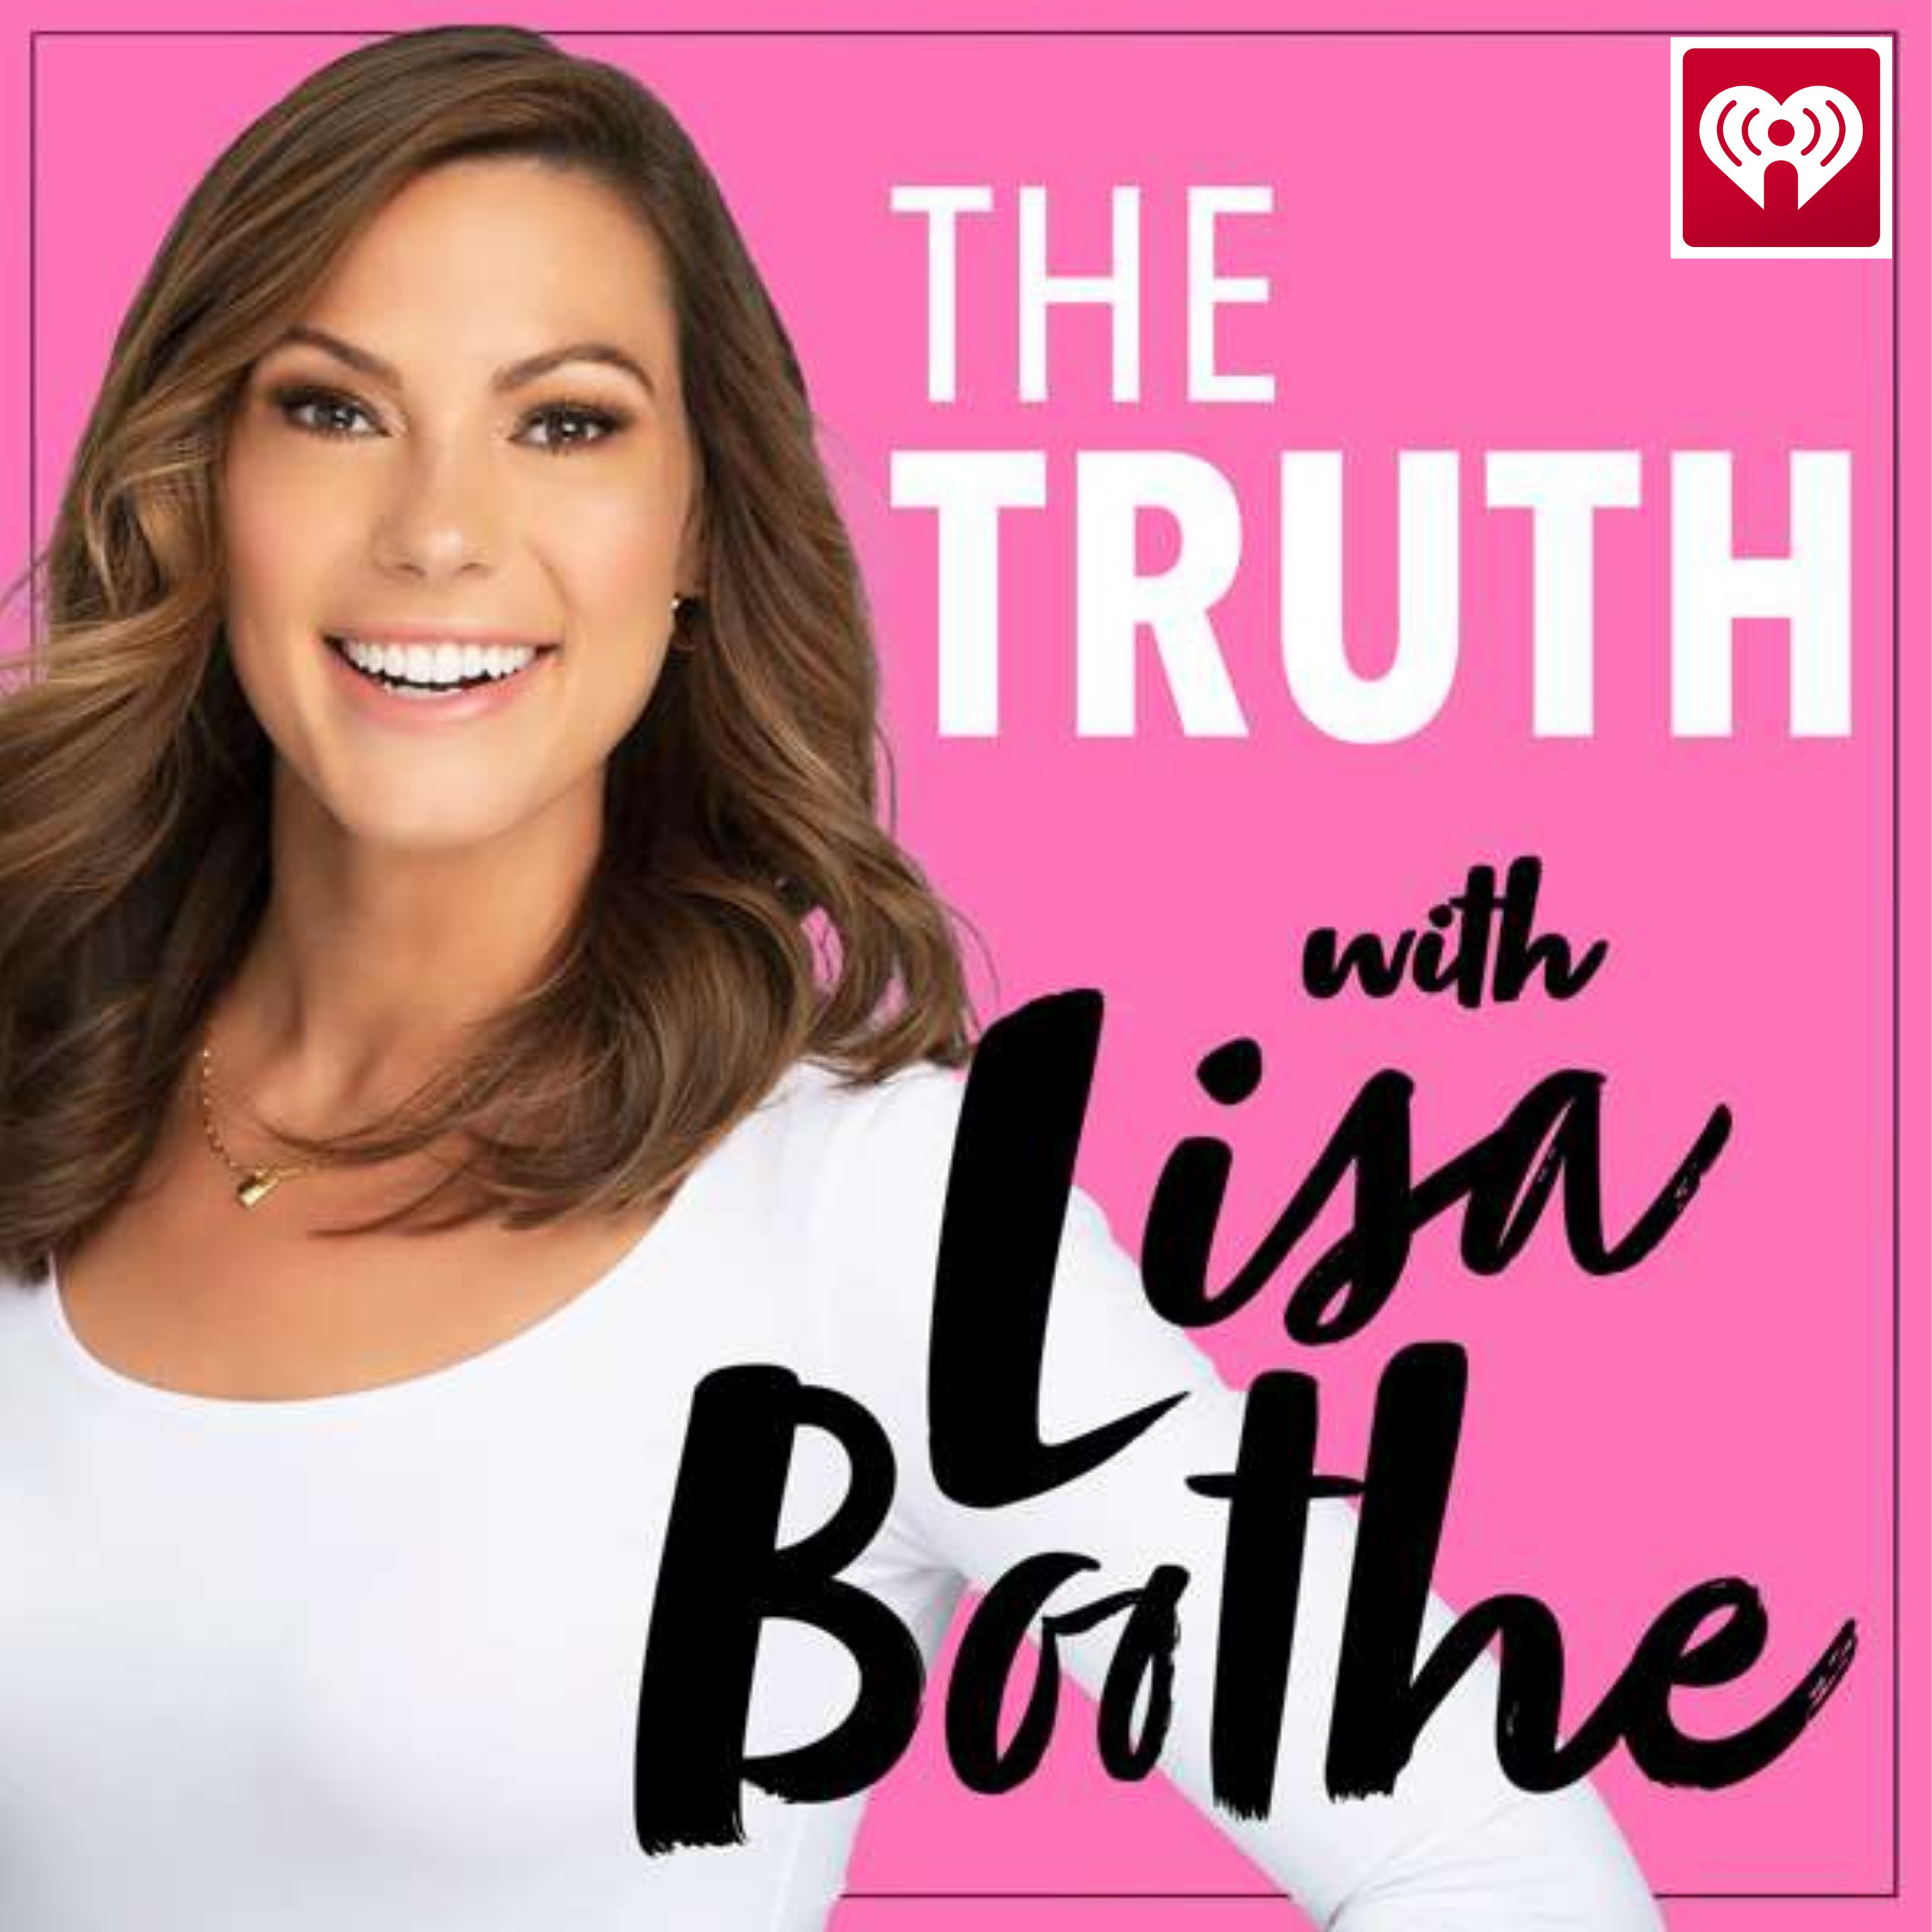 The Truth with Lisa Boothe: How Do We Clean Up Our Colleges & Universities with Josh Hammer